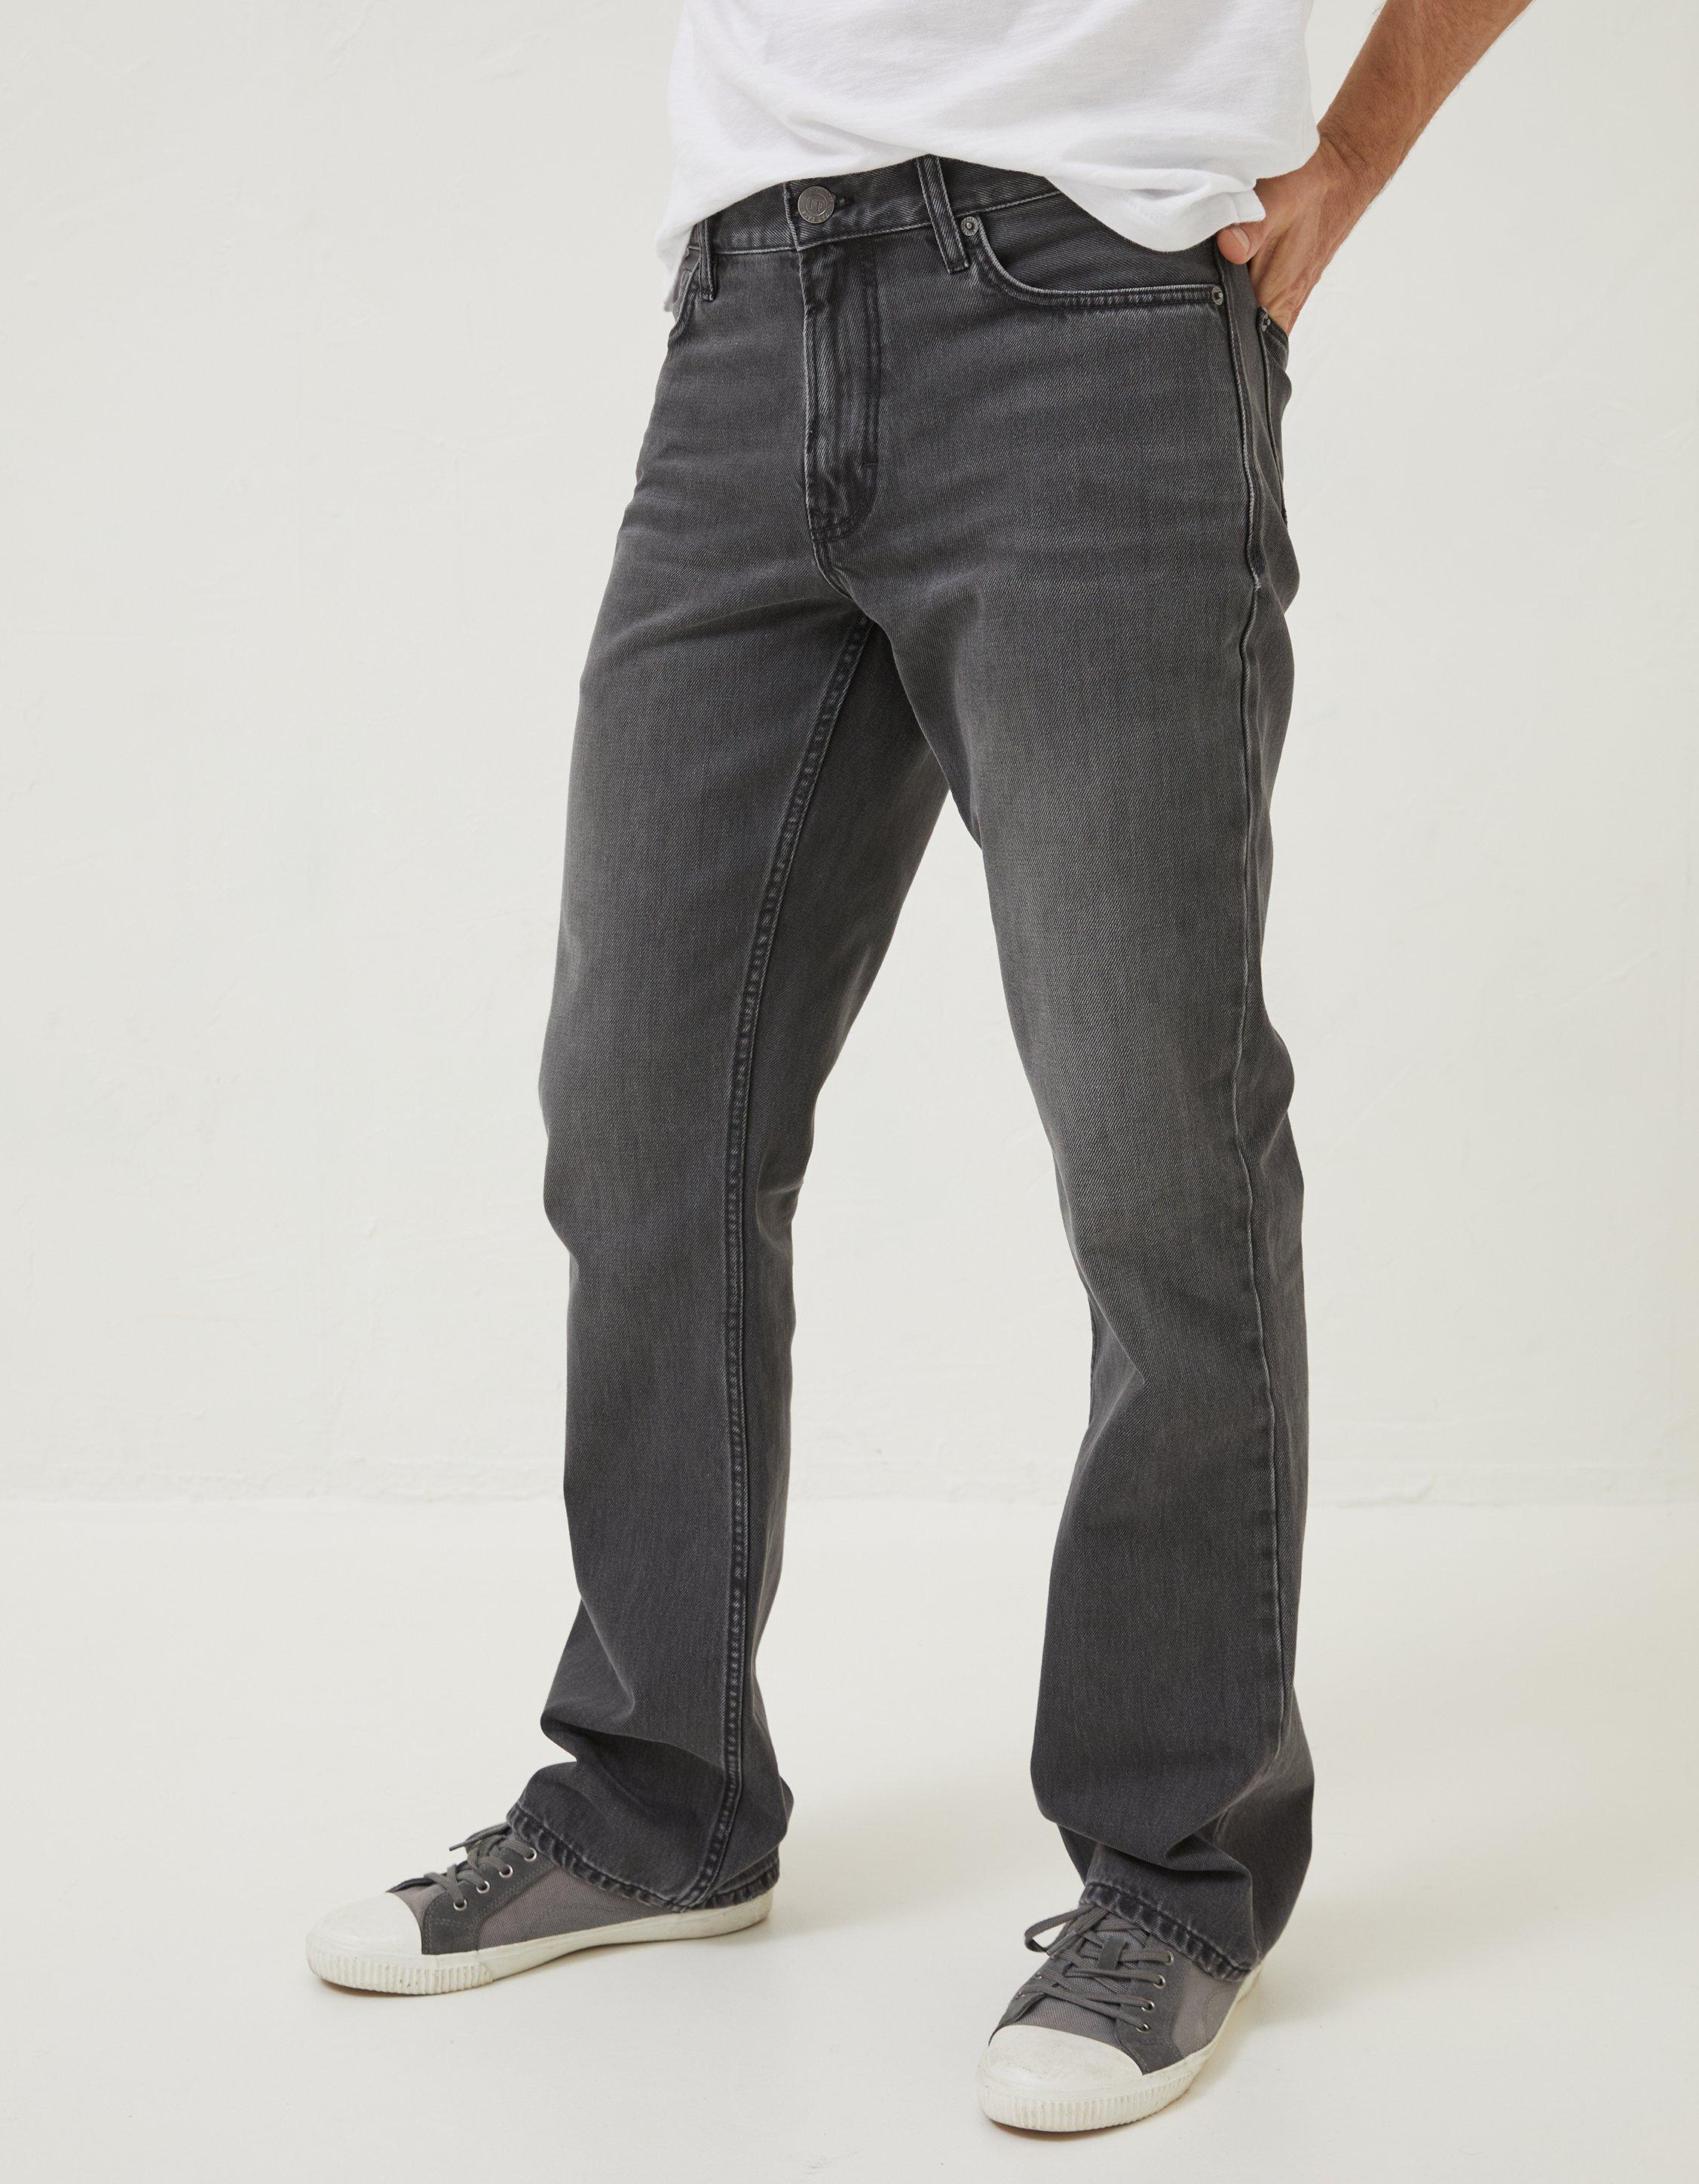 Jeans Grey Jeans, Wash Bootcut